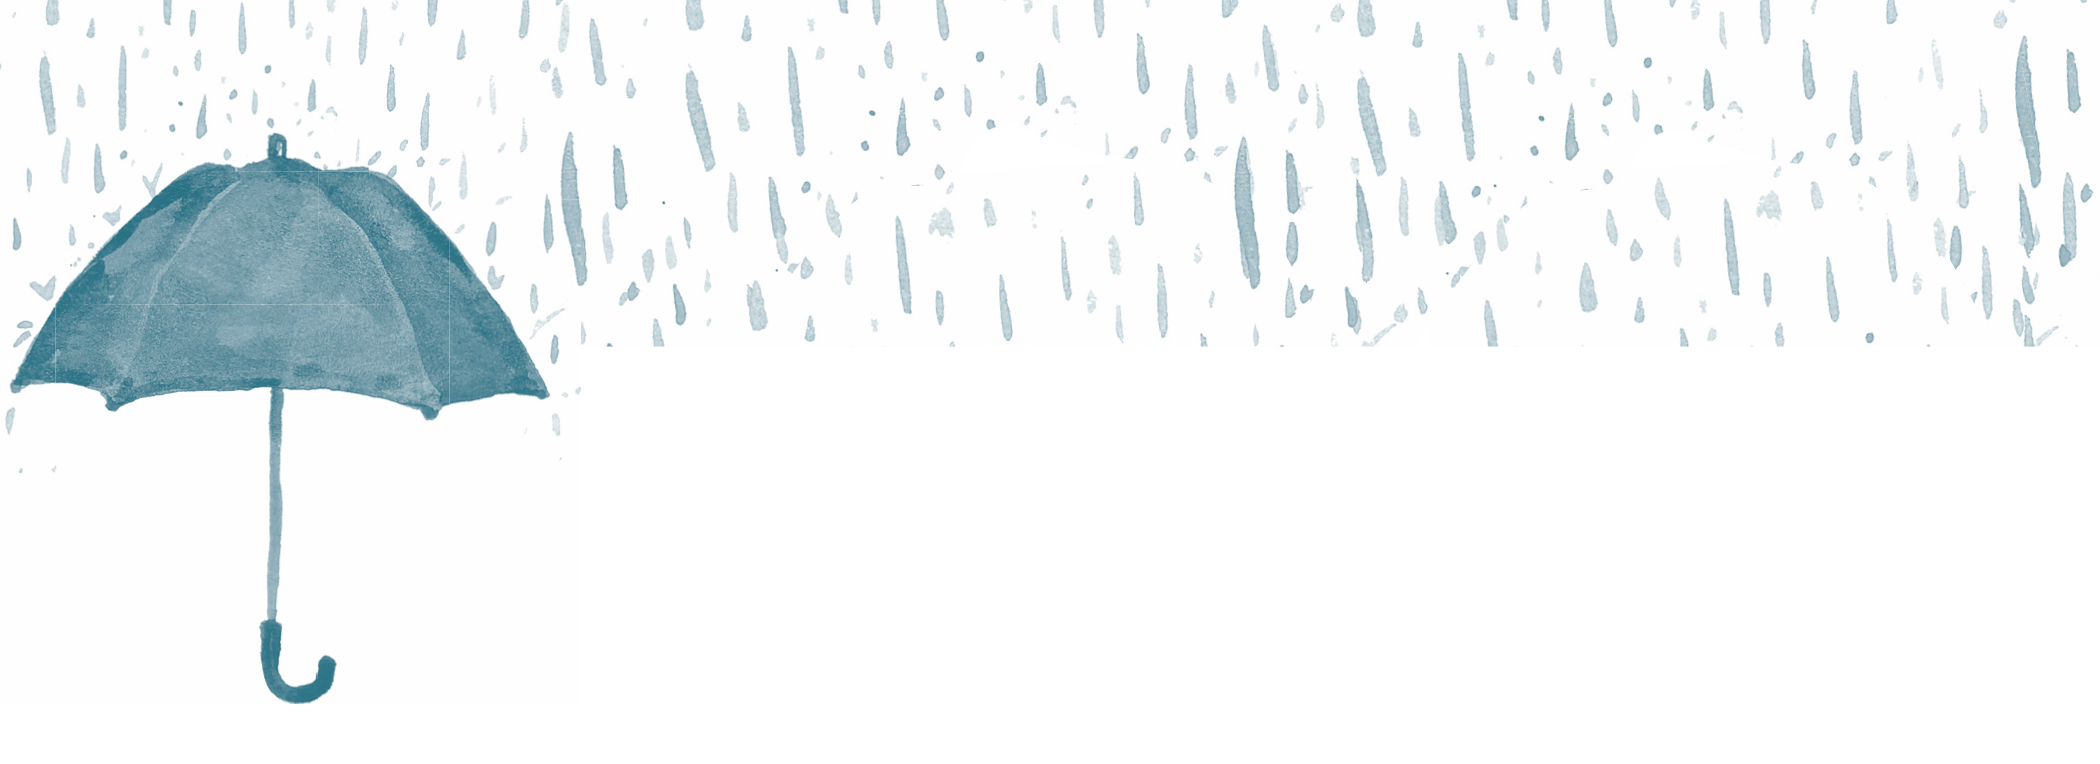 A drawing of an open umbrella over which rain droplets fall.